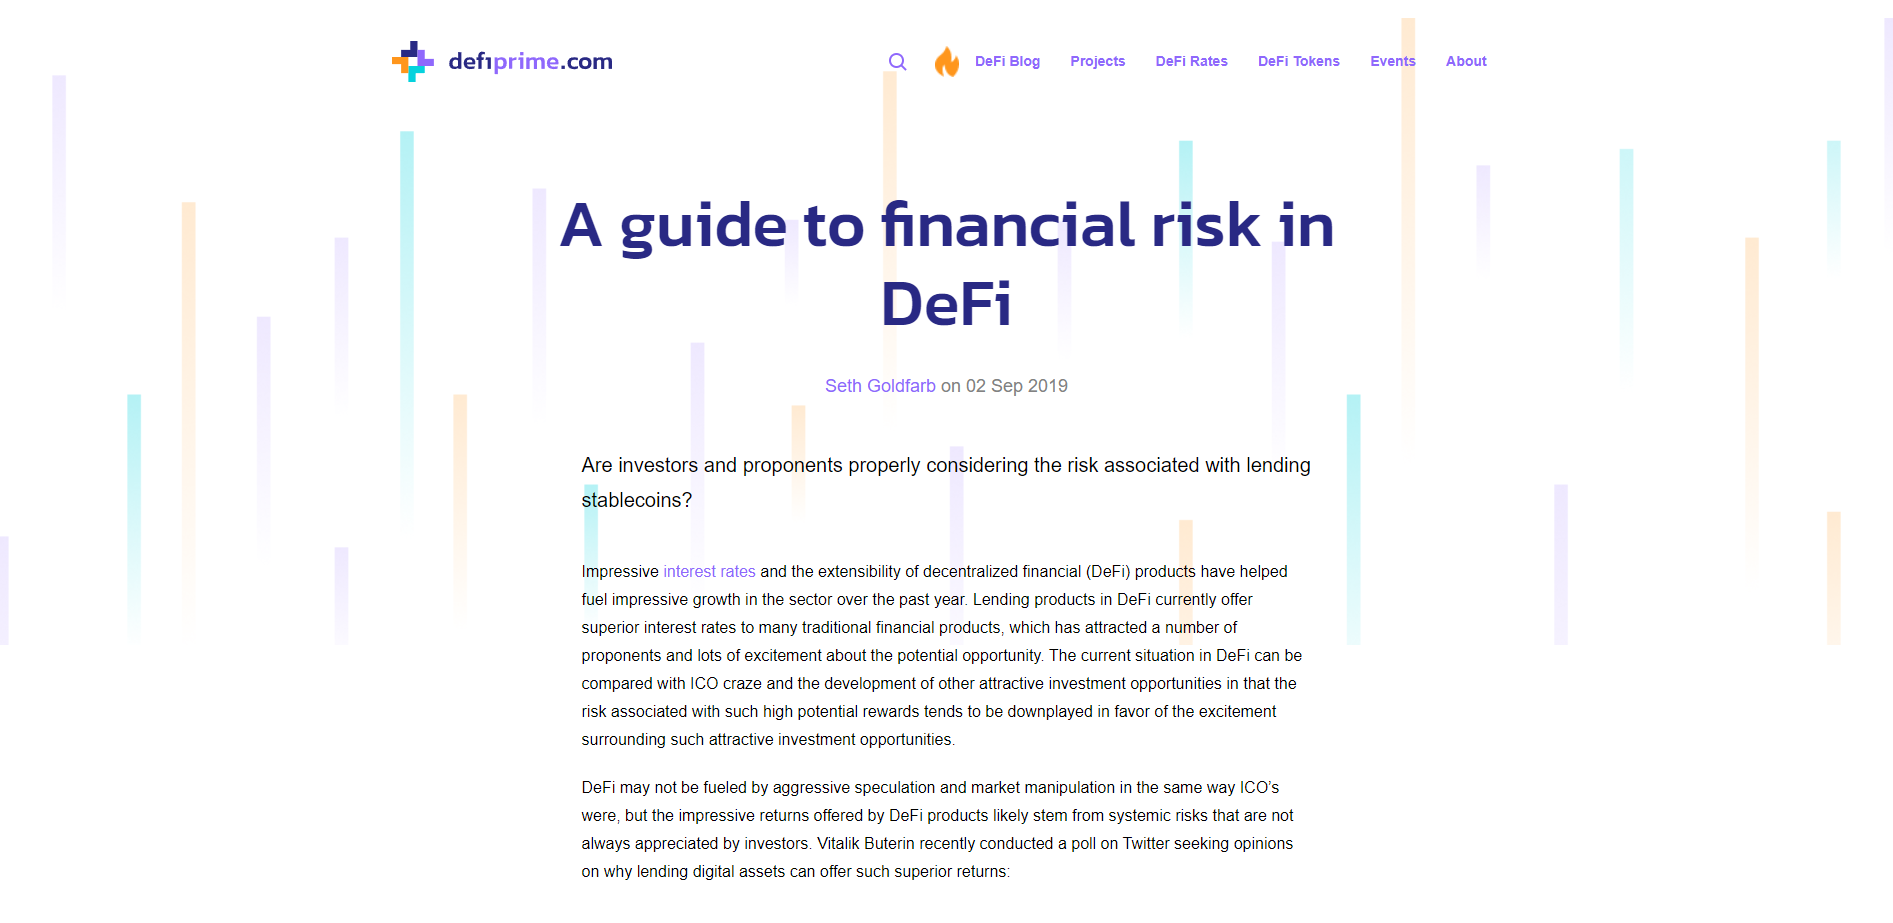 A guide to financial risk in DeFi